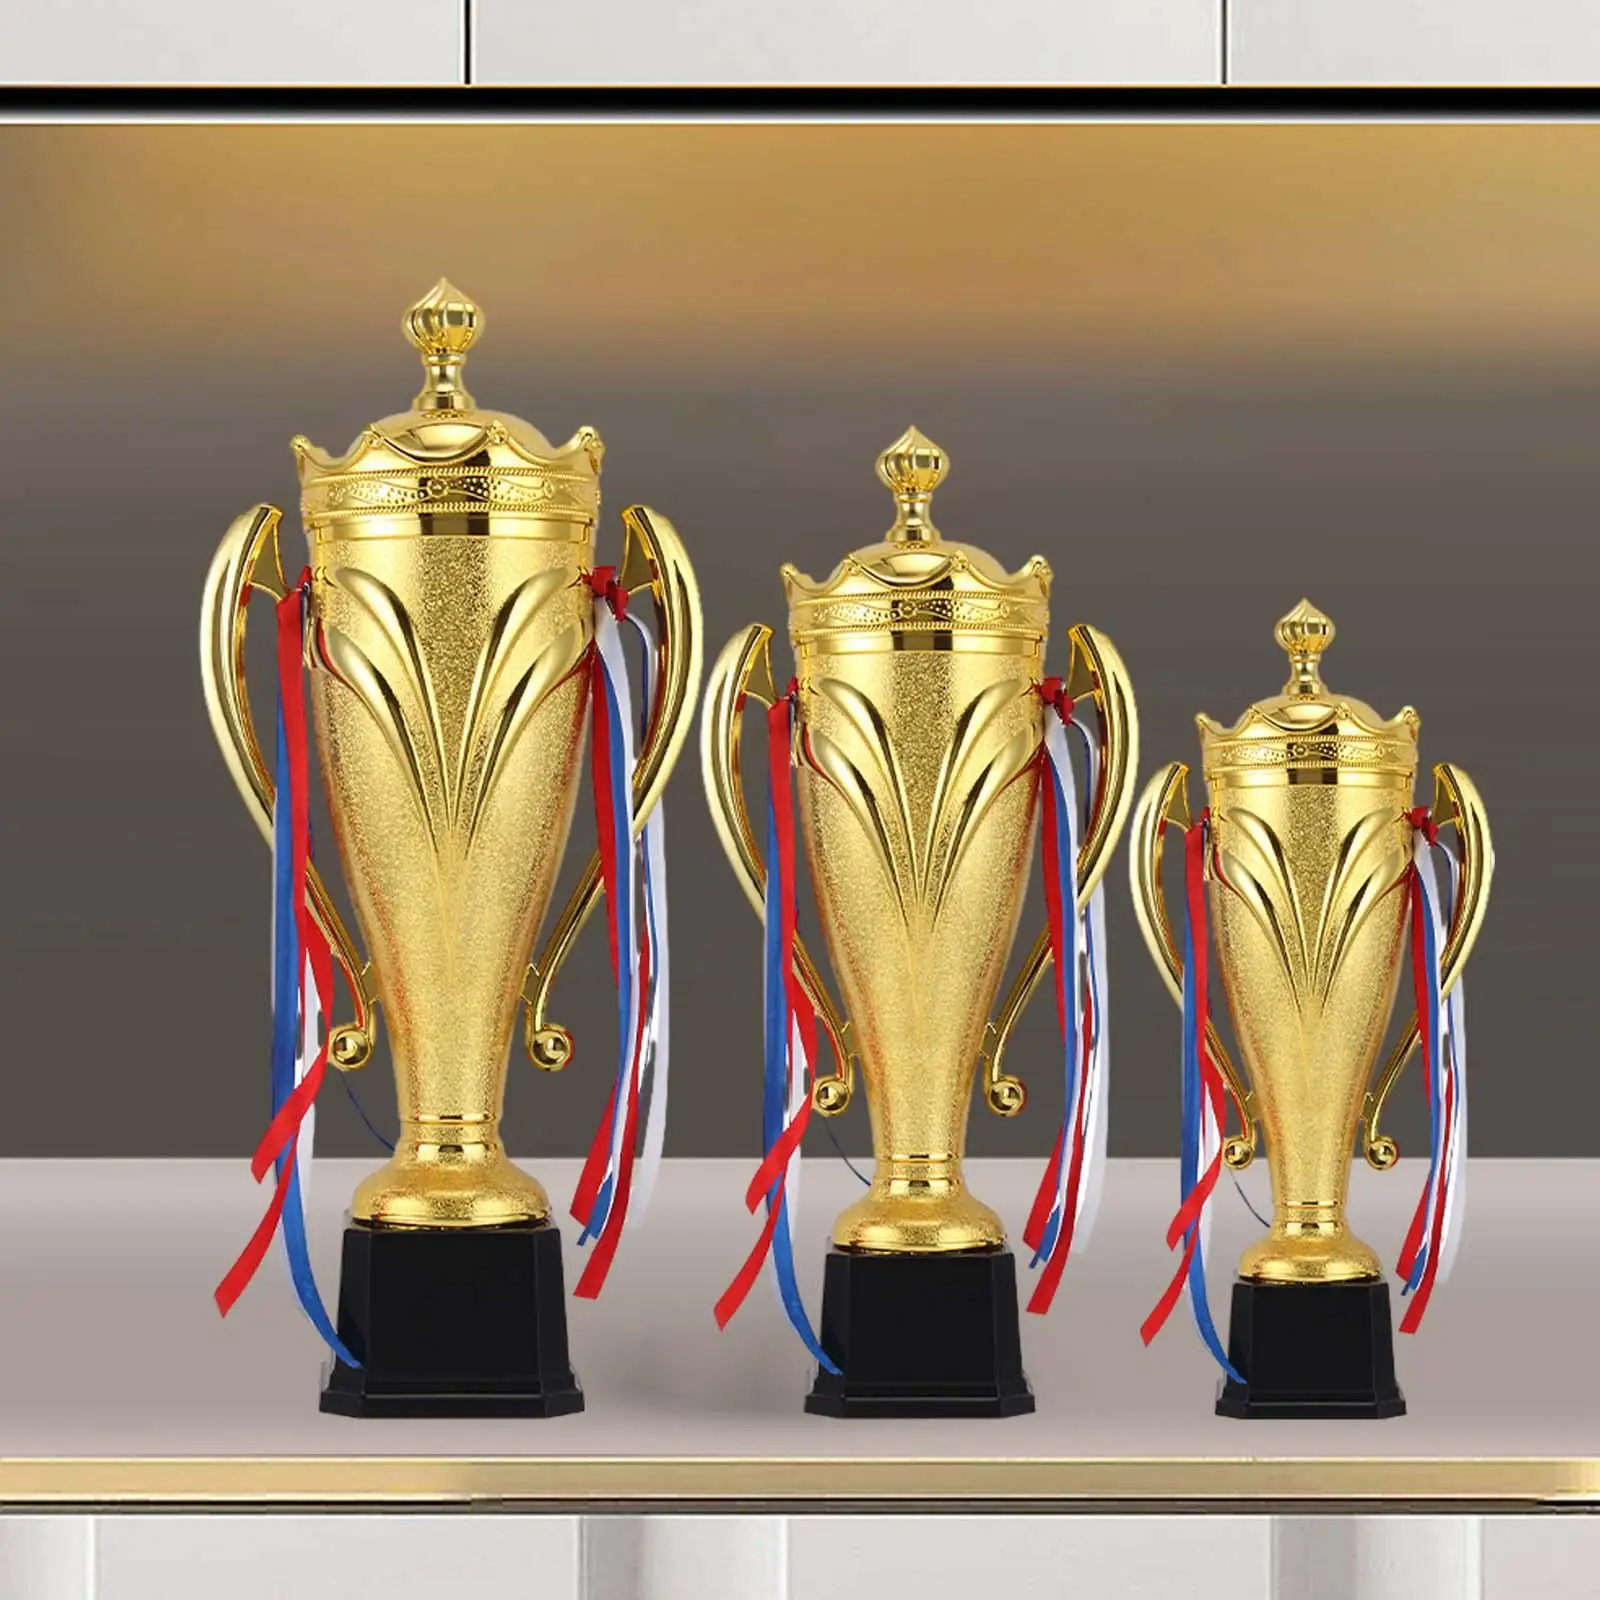 Child Trophy Cups PP Award Trophies Cup Versatile Smooth Surface Decorative Winning Prizes for Children Competitions